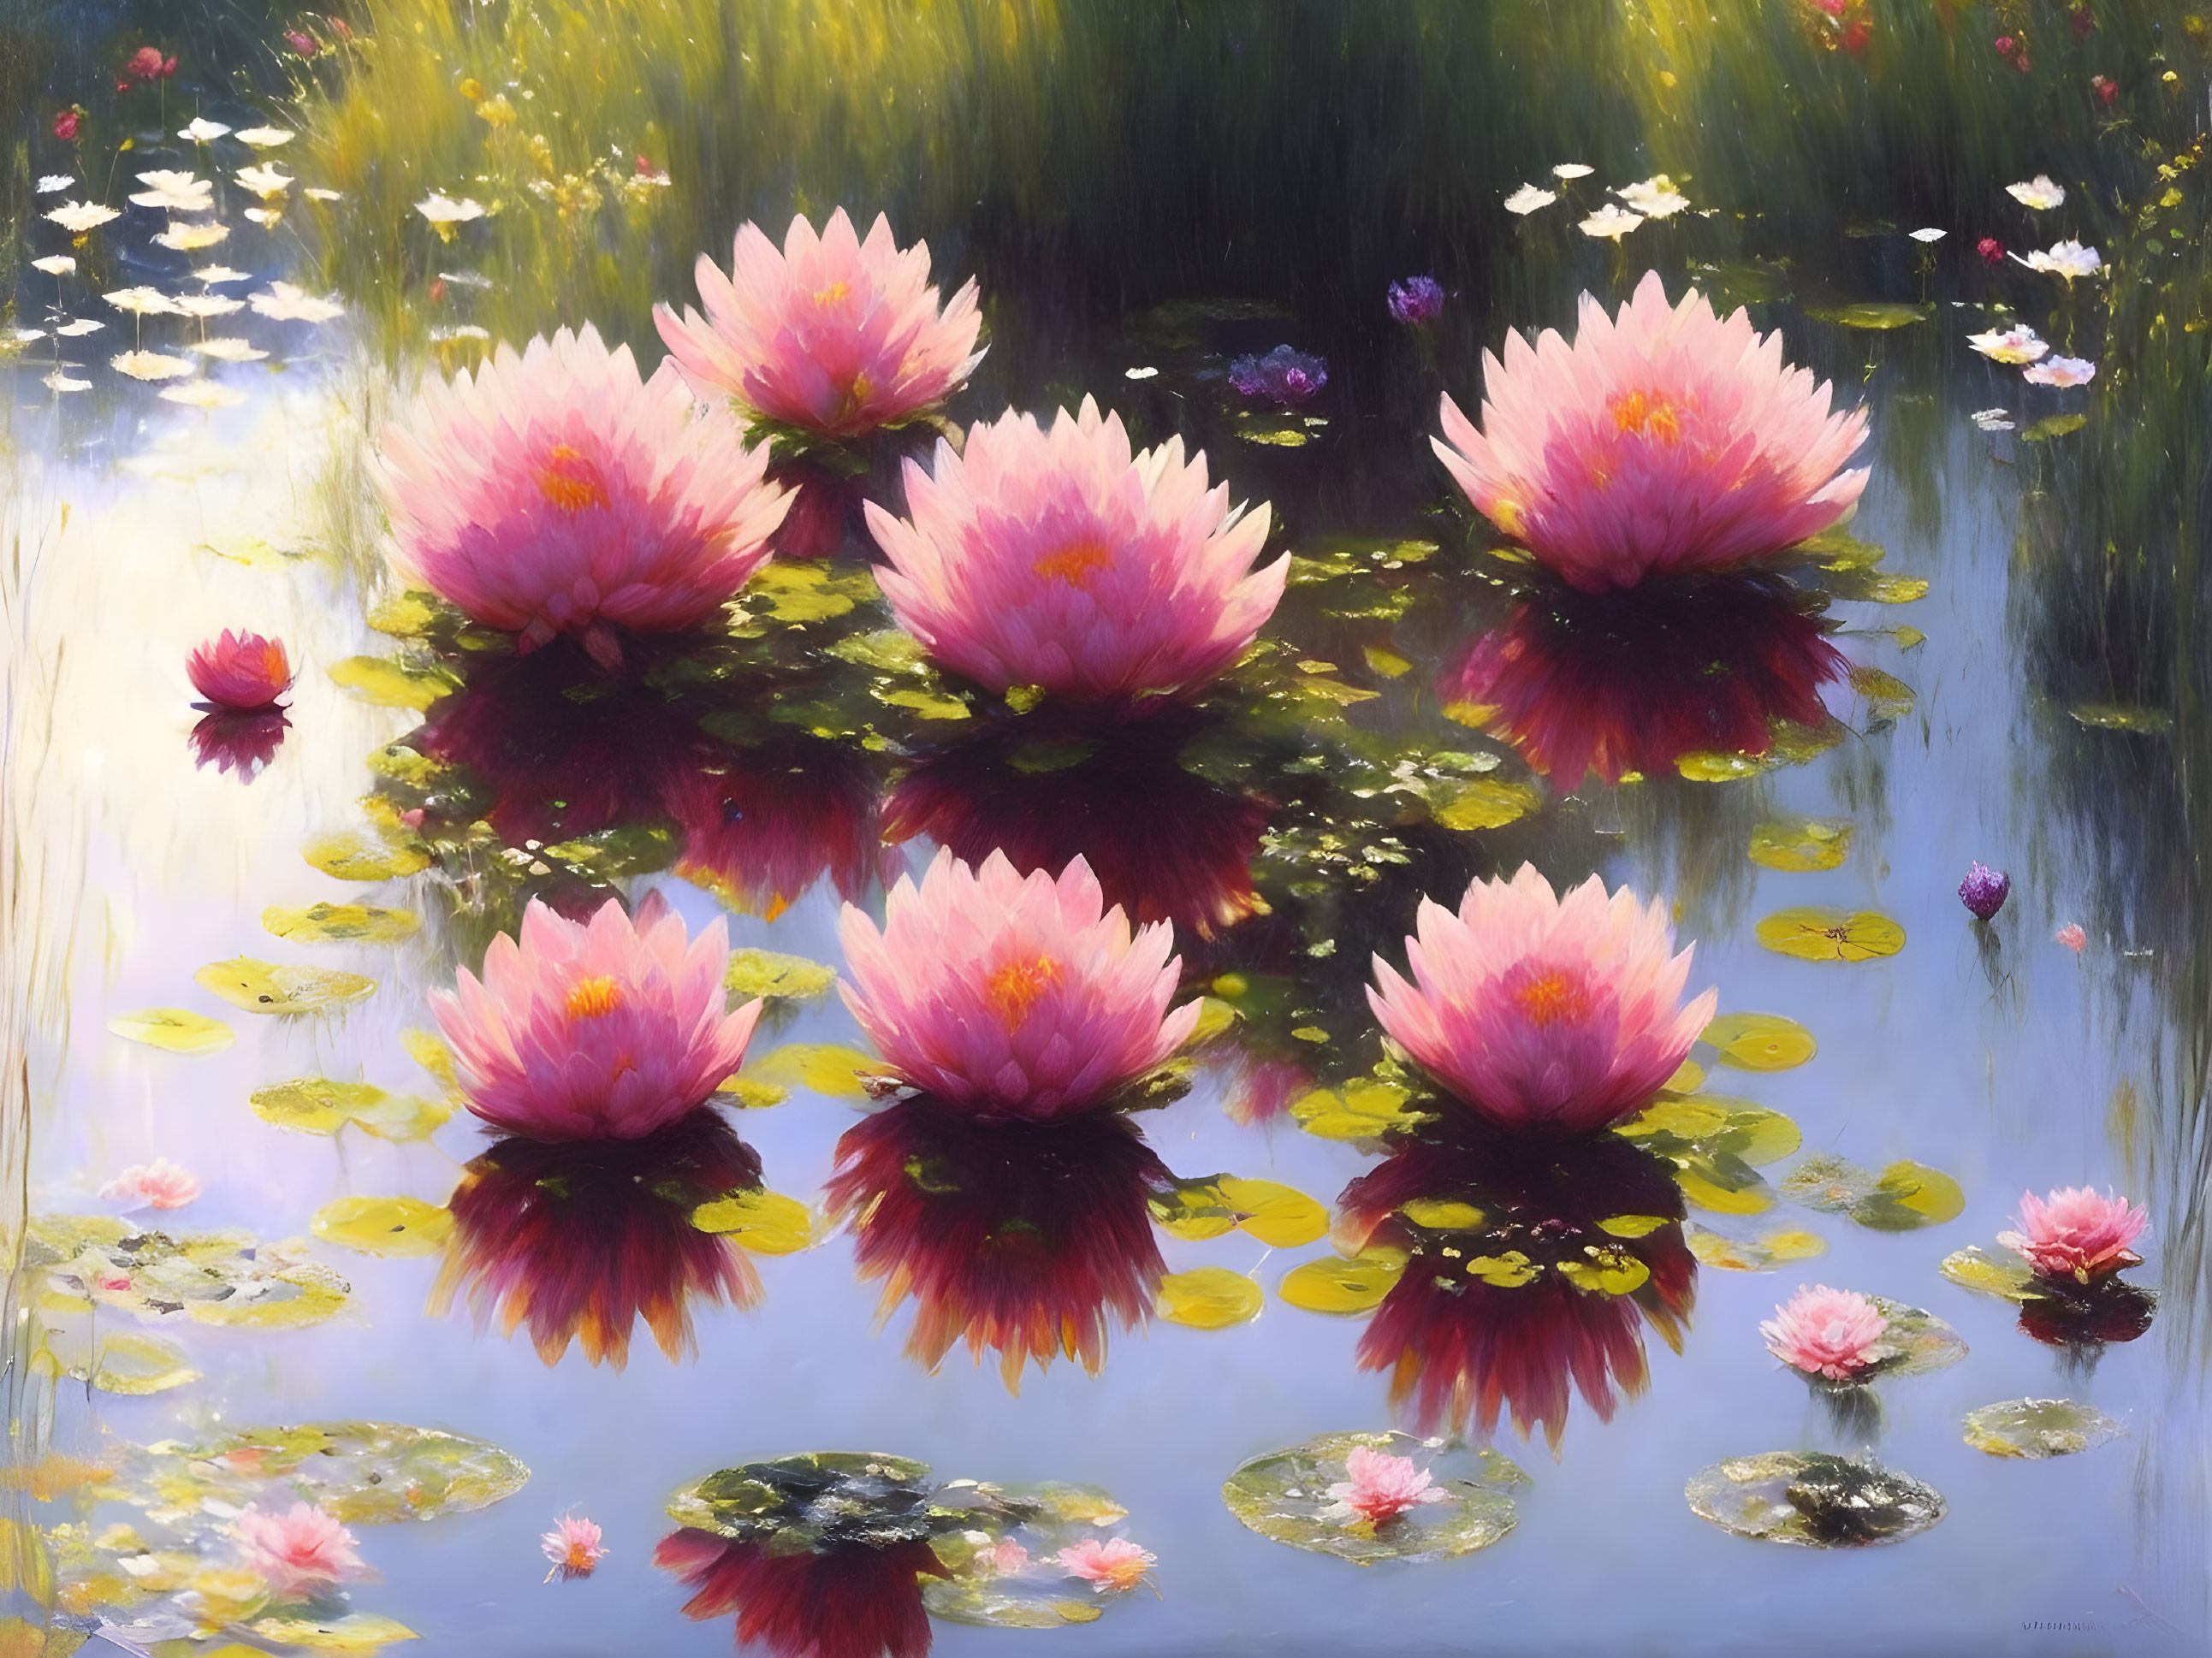 Tranquil Waters: Pink Lily Pond